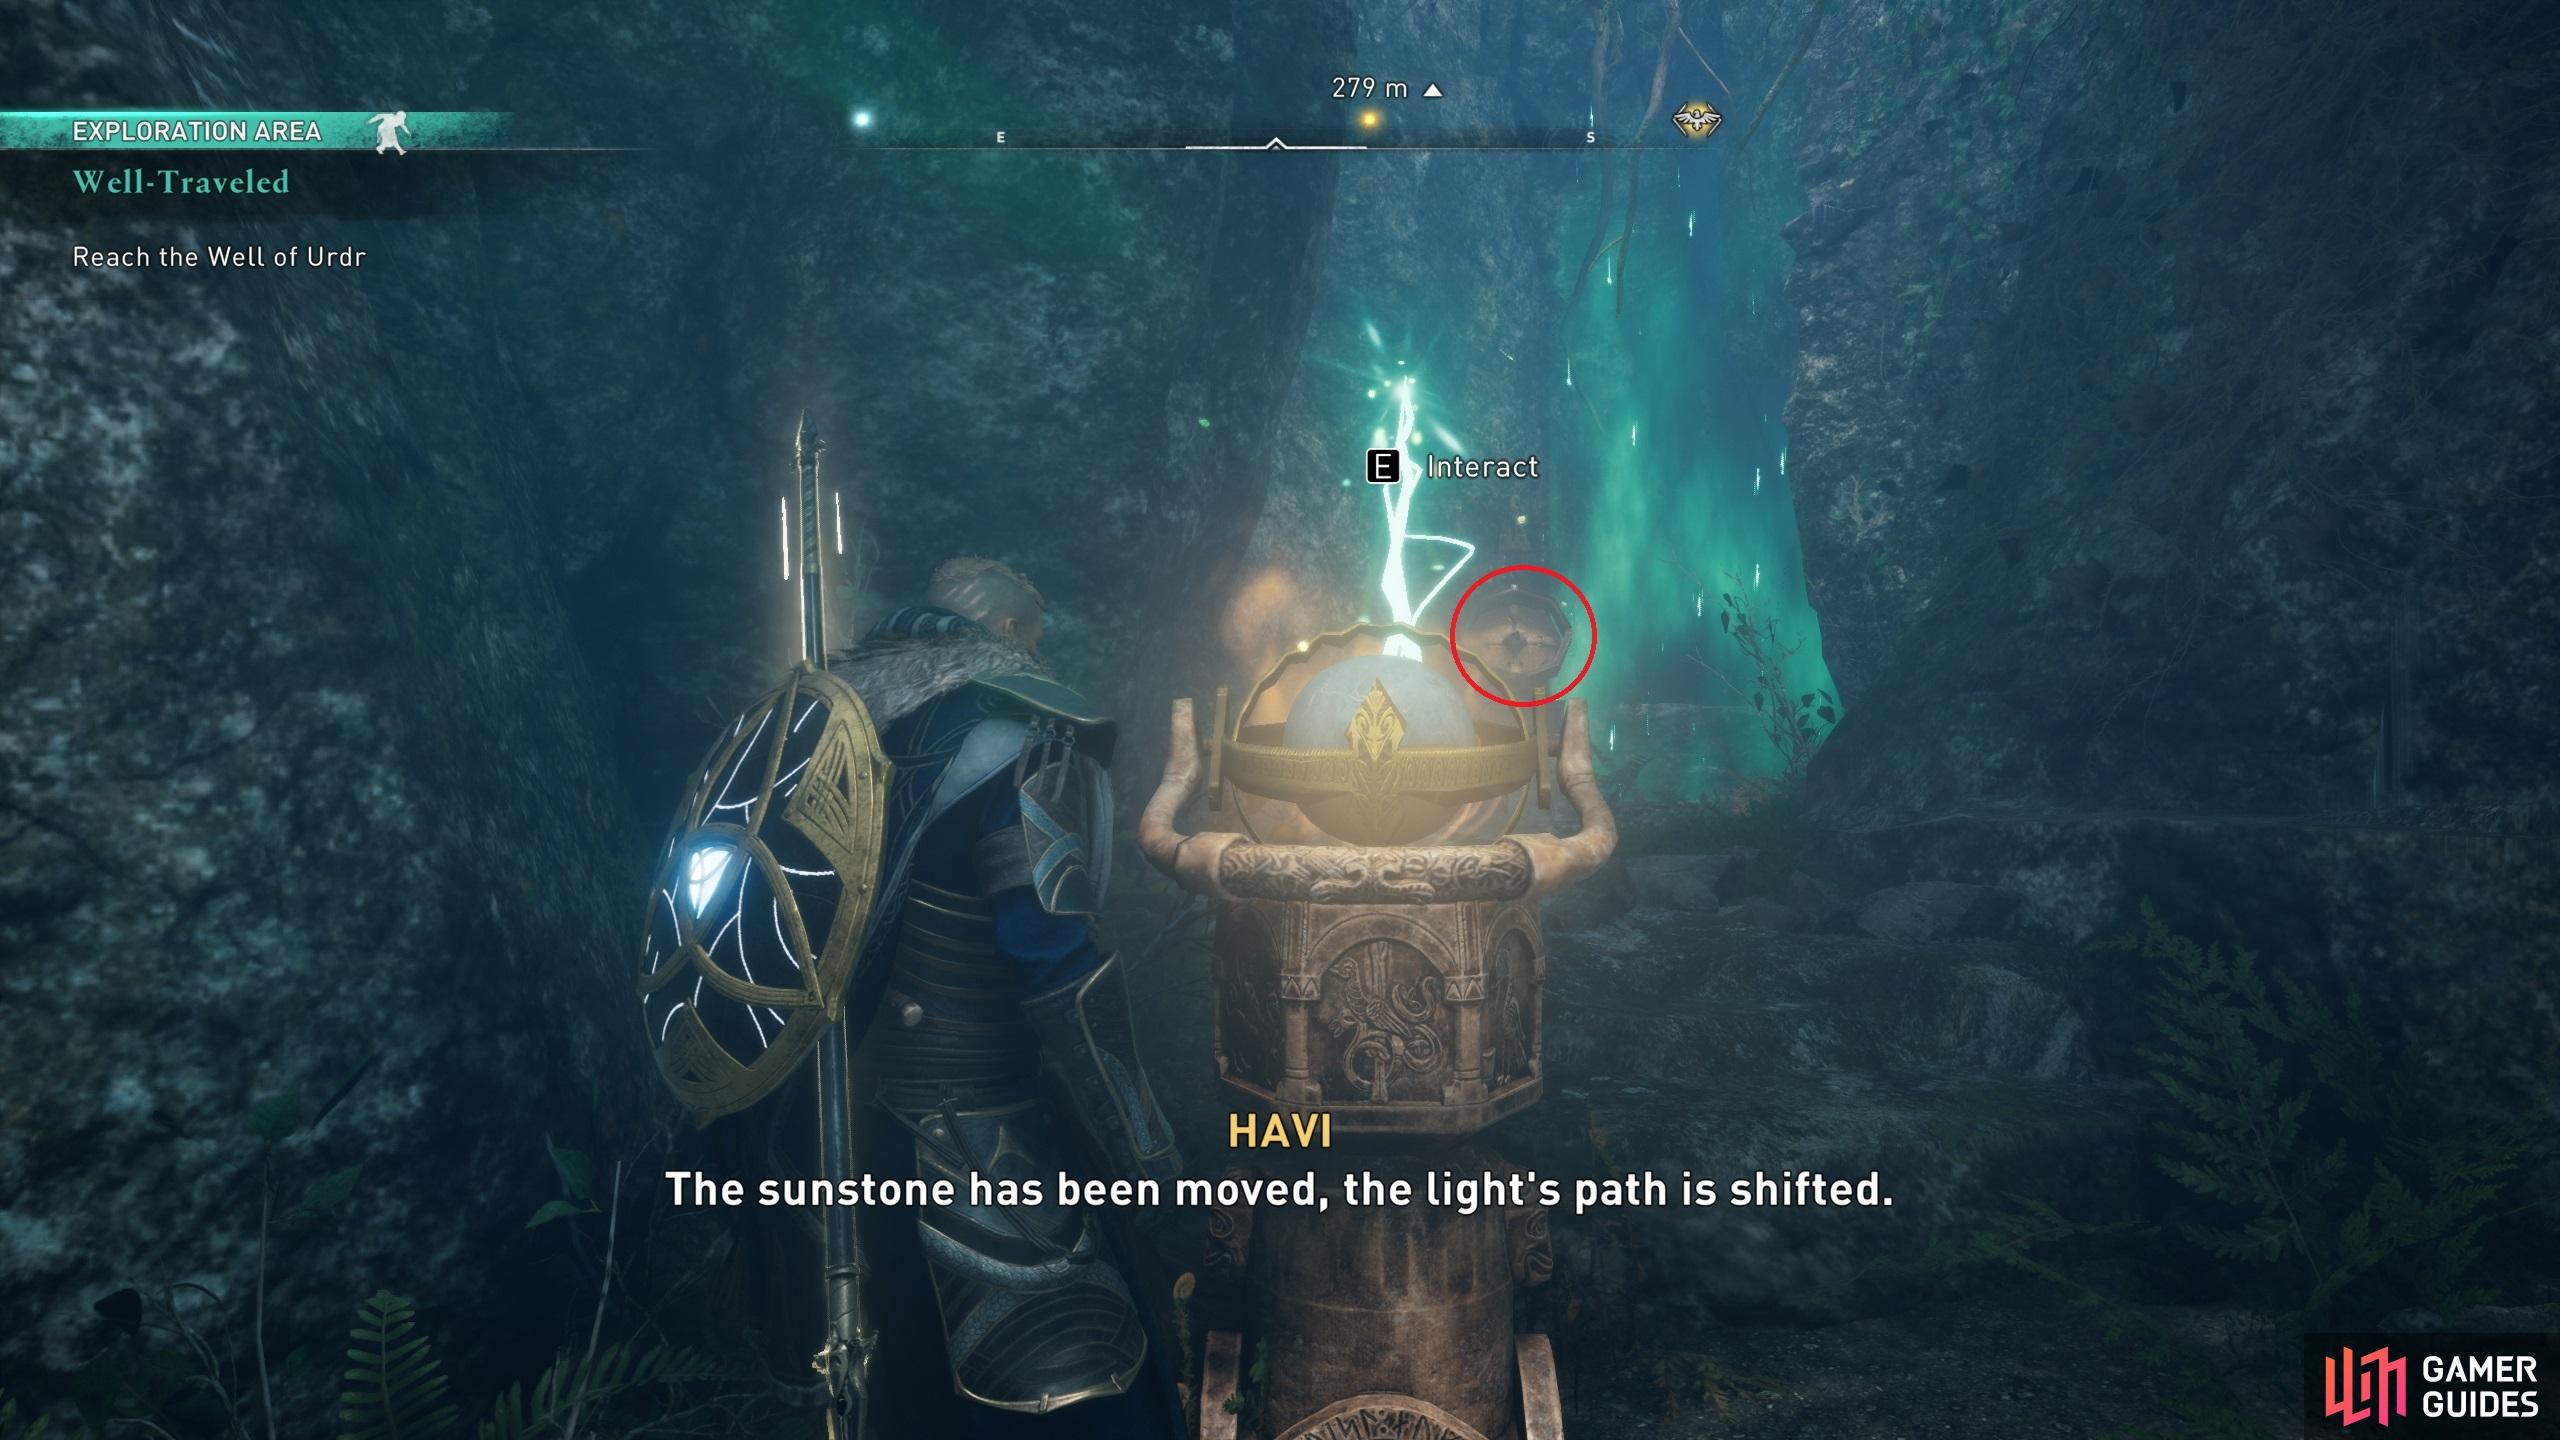 You'll need to align the beam of light with the mechanism directly in front of you to proceed through the cave.